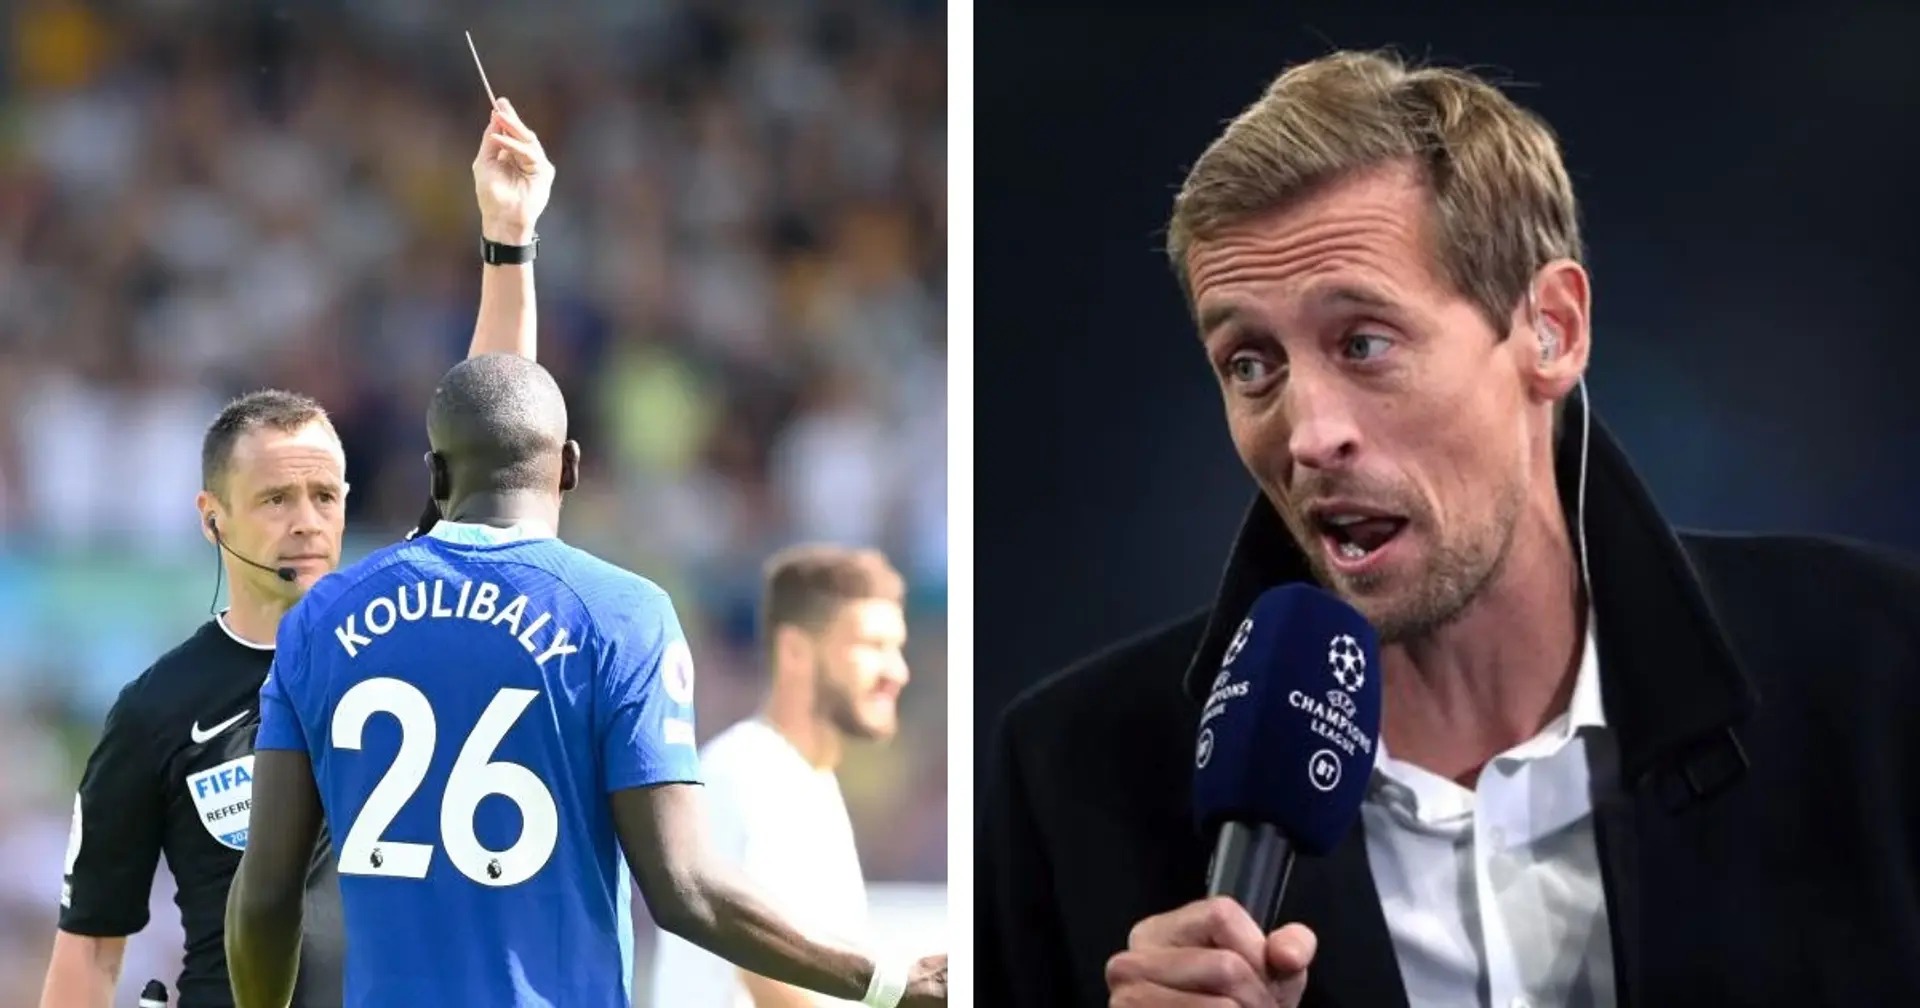 Crouch says Koulibaly's made a 'pig's ear' of John Terry's shirt number